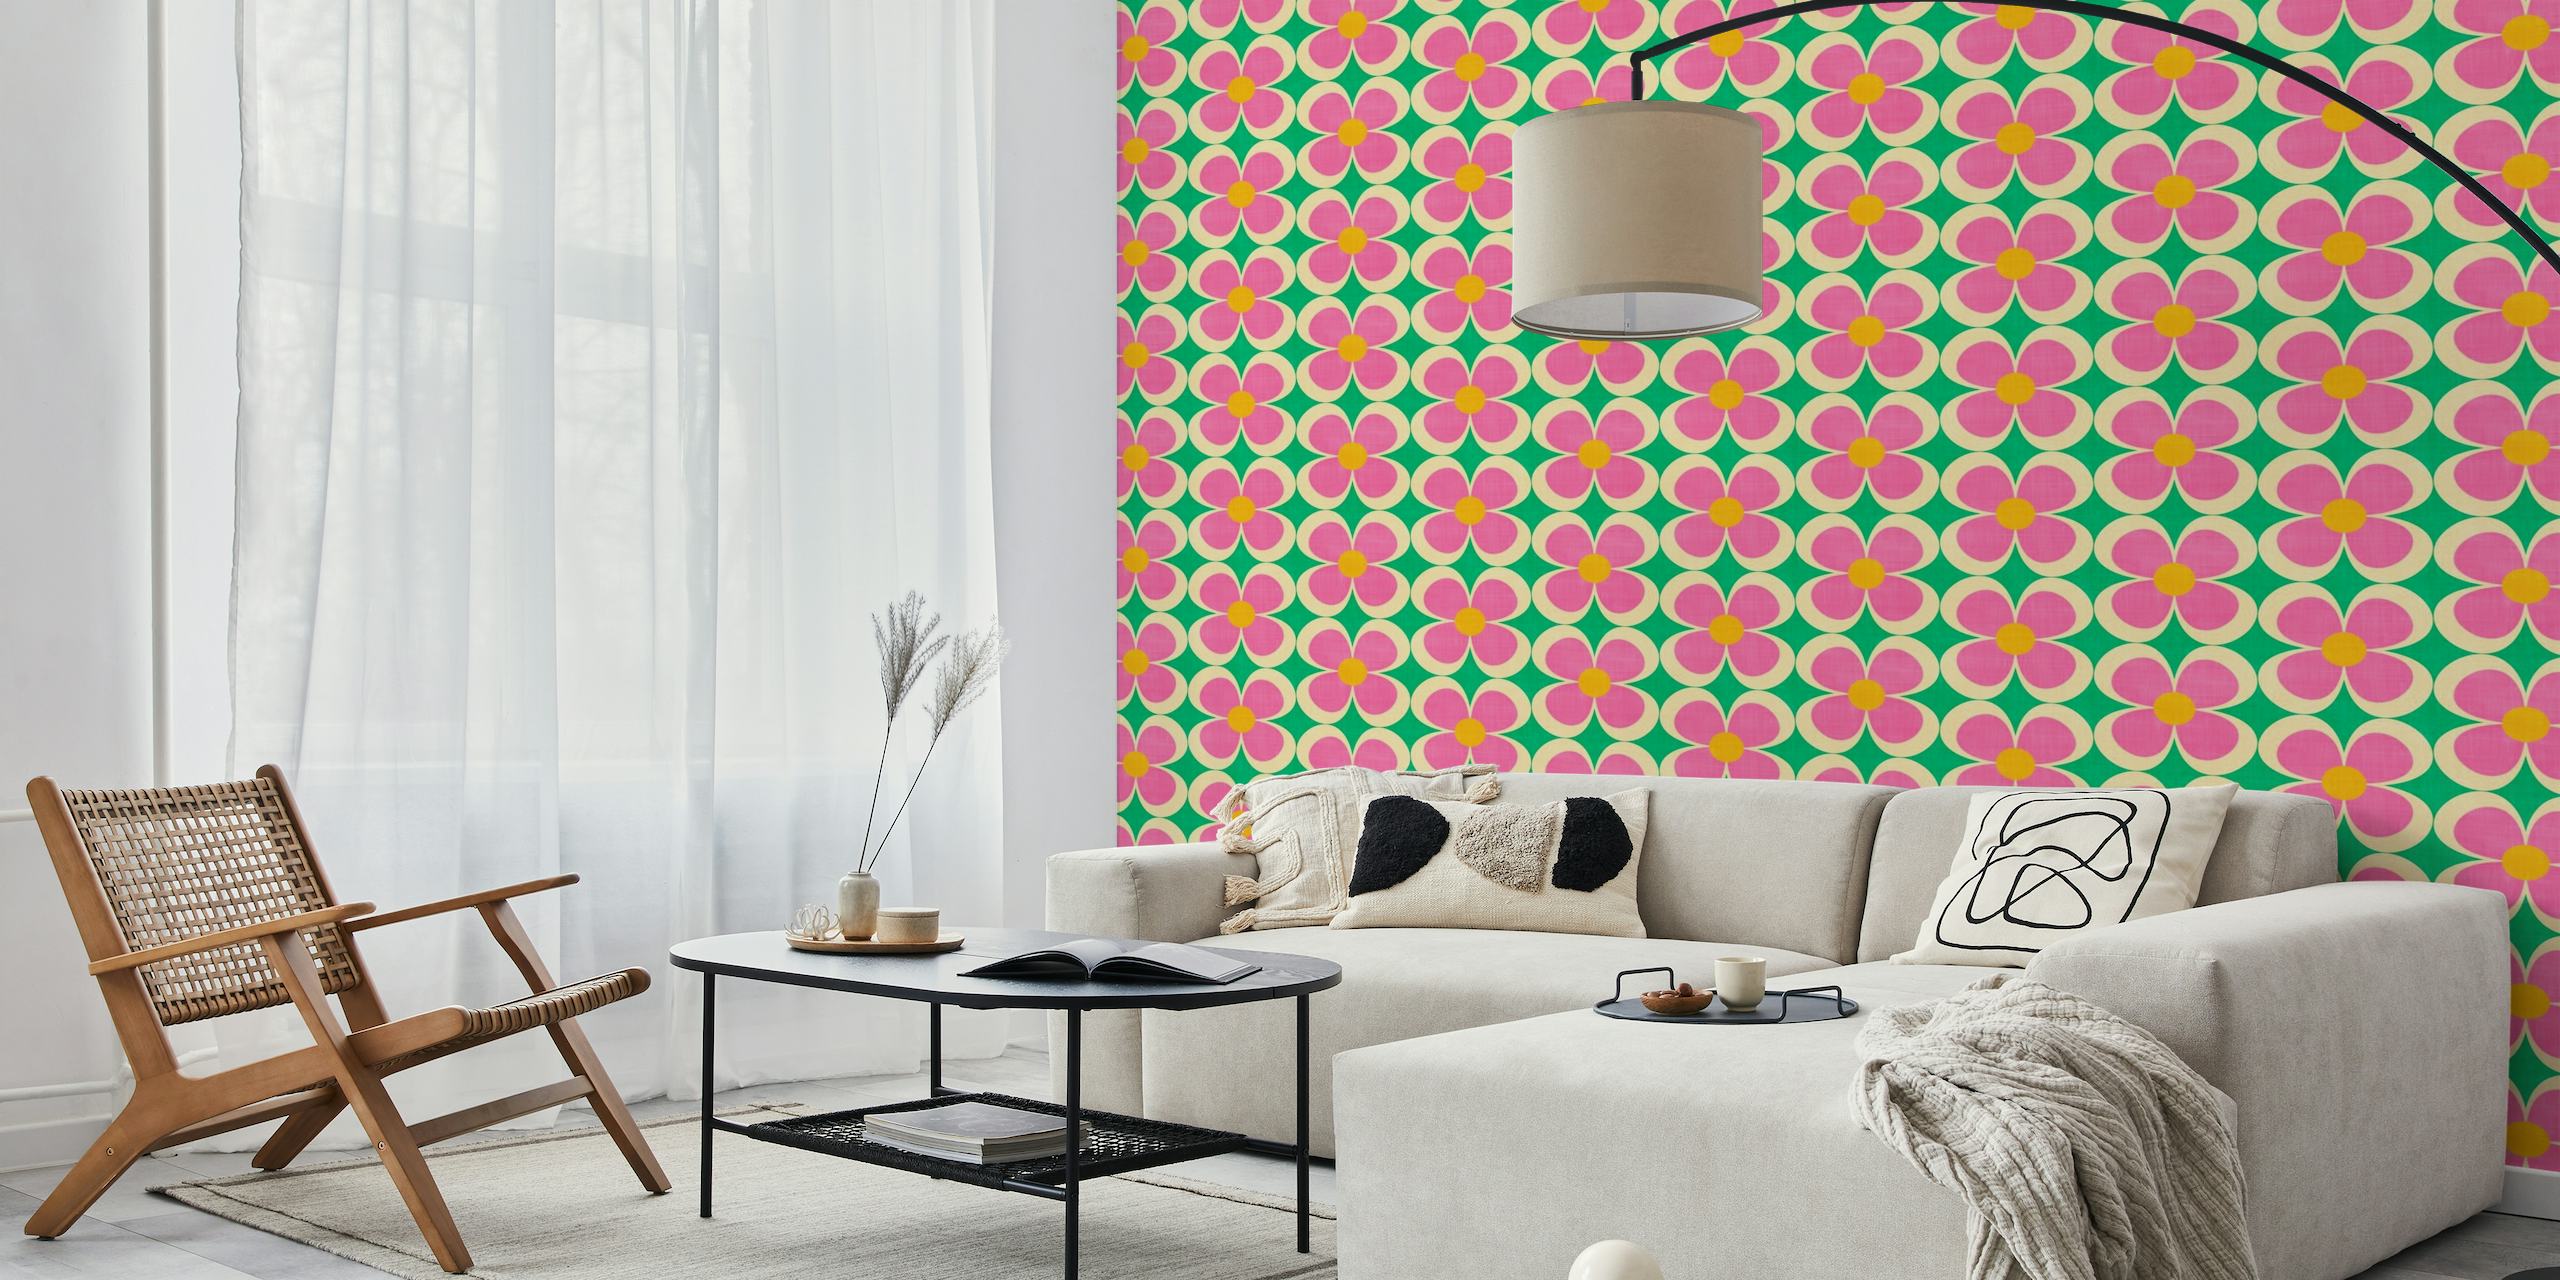 Groovy Geometric Floral Pink and Green Small wallpaper